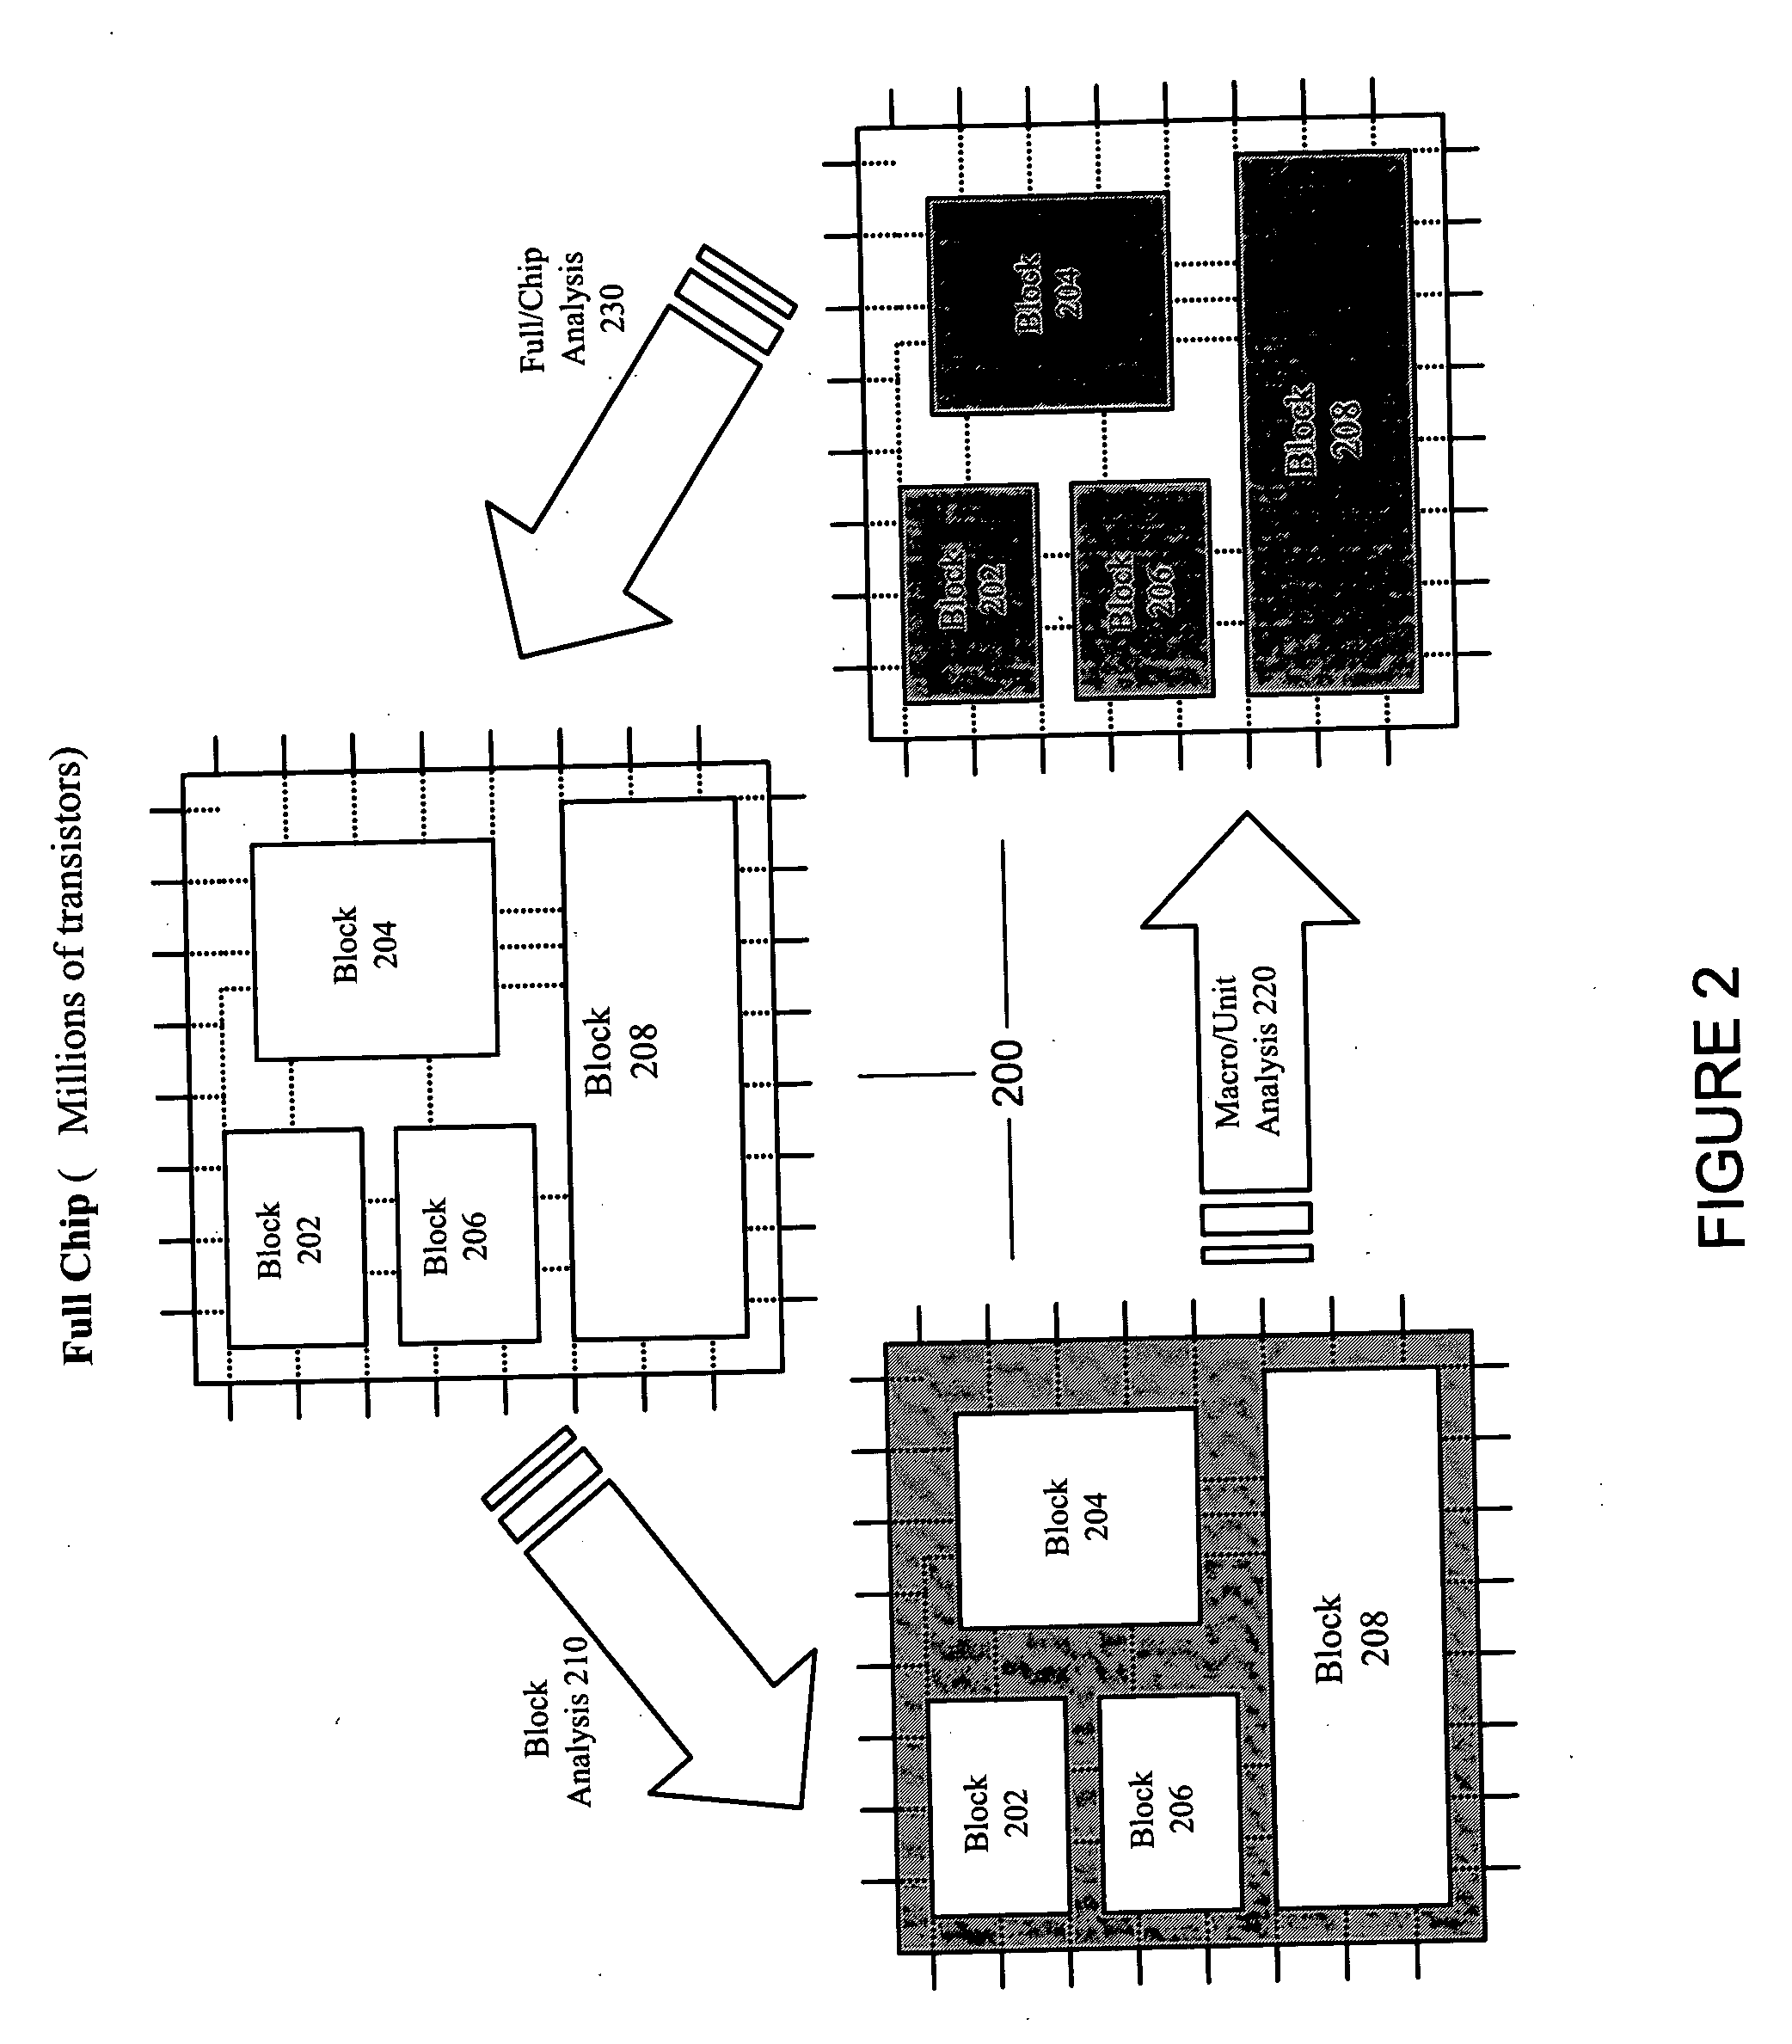 System and method for circuit noise analysis